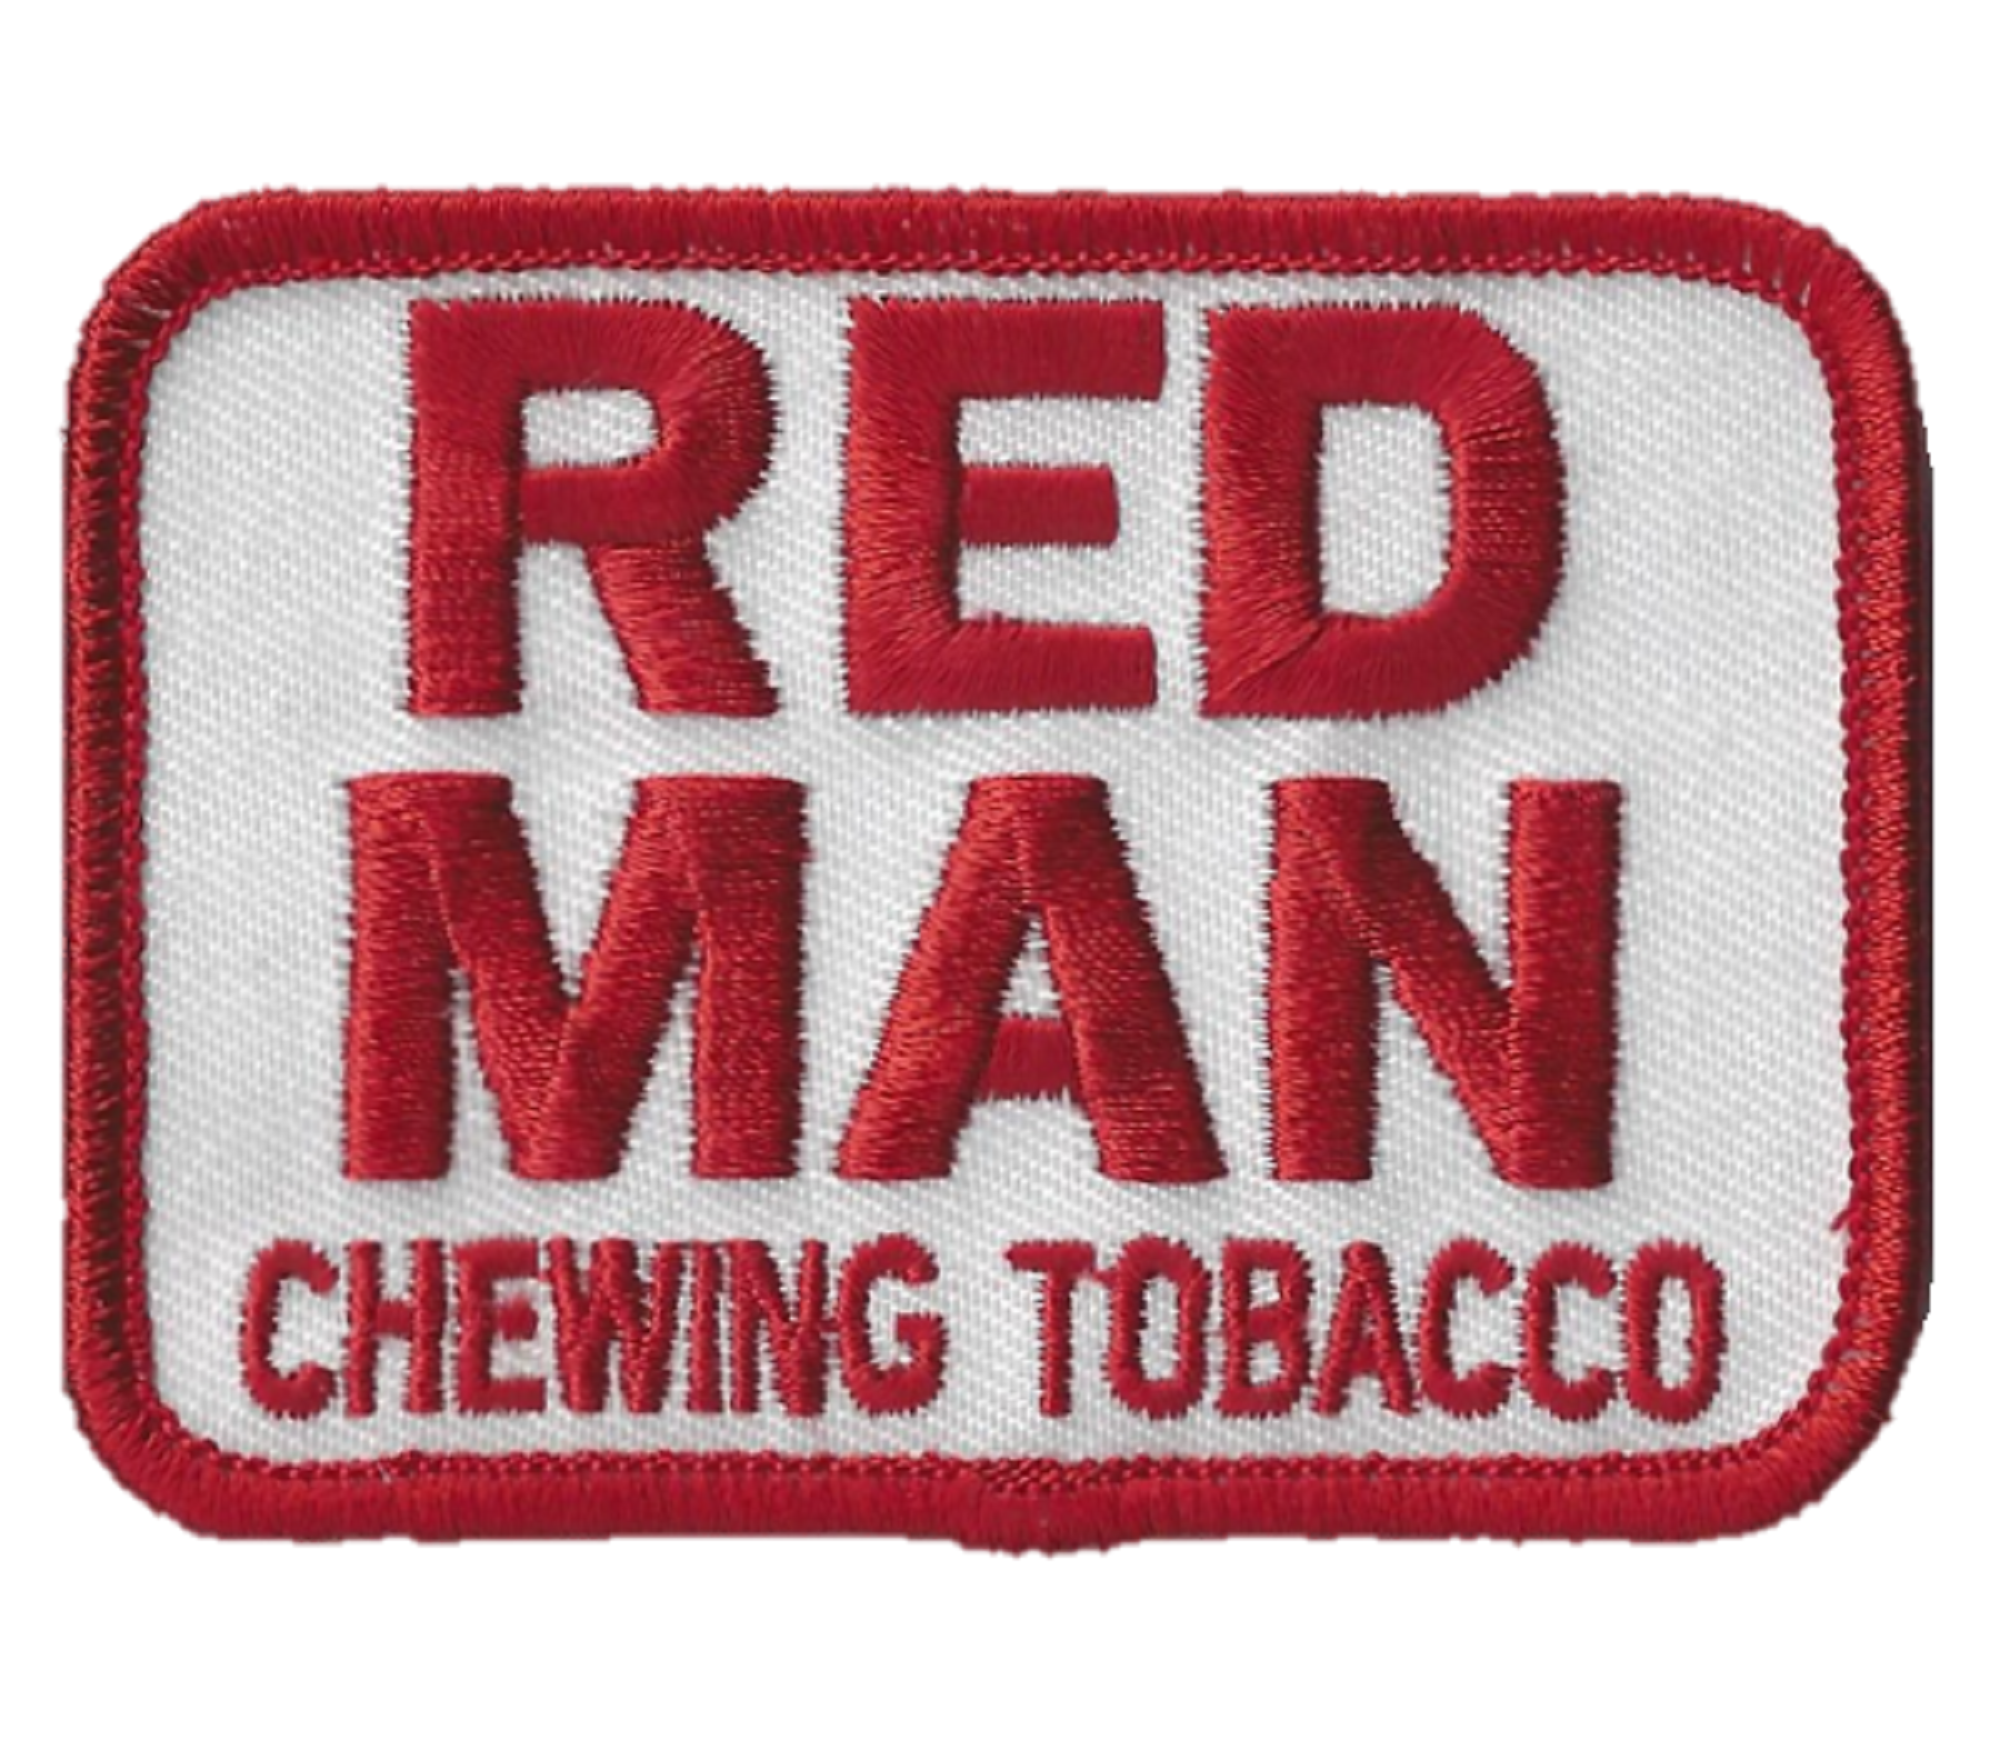 red man chewing tobacco logo